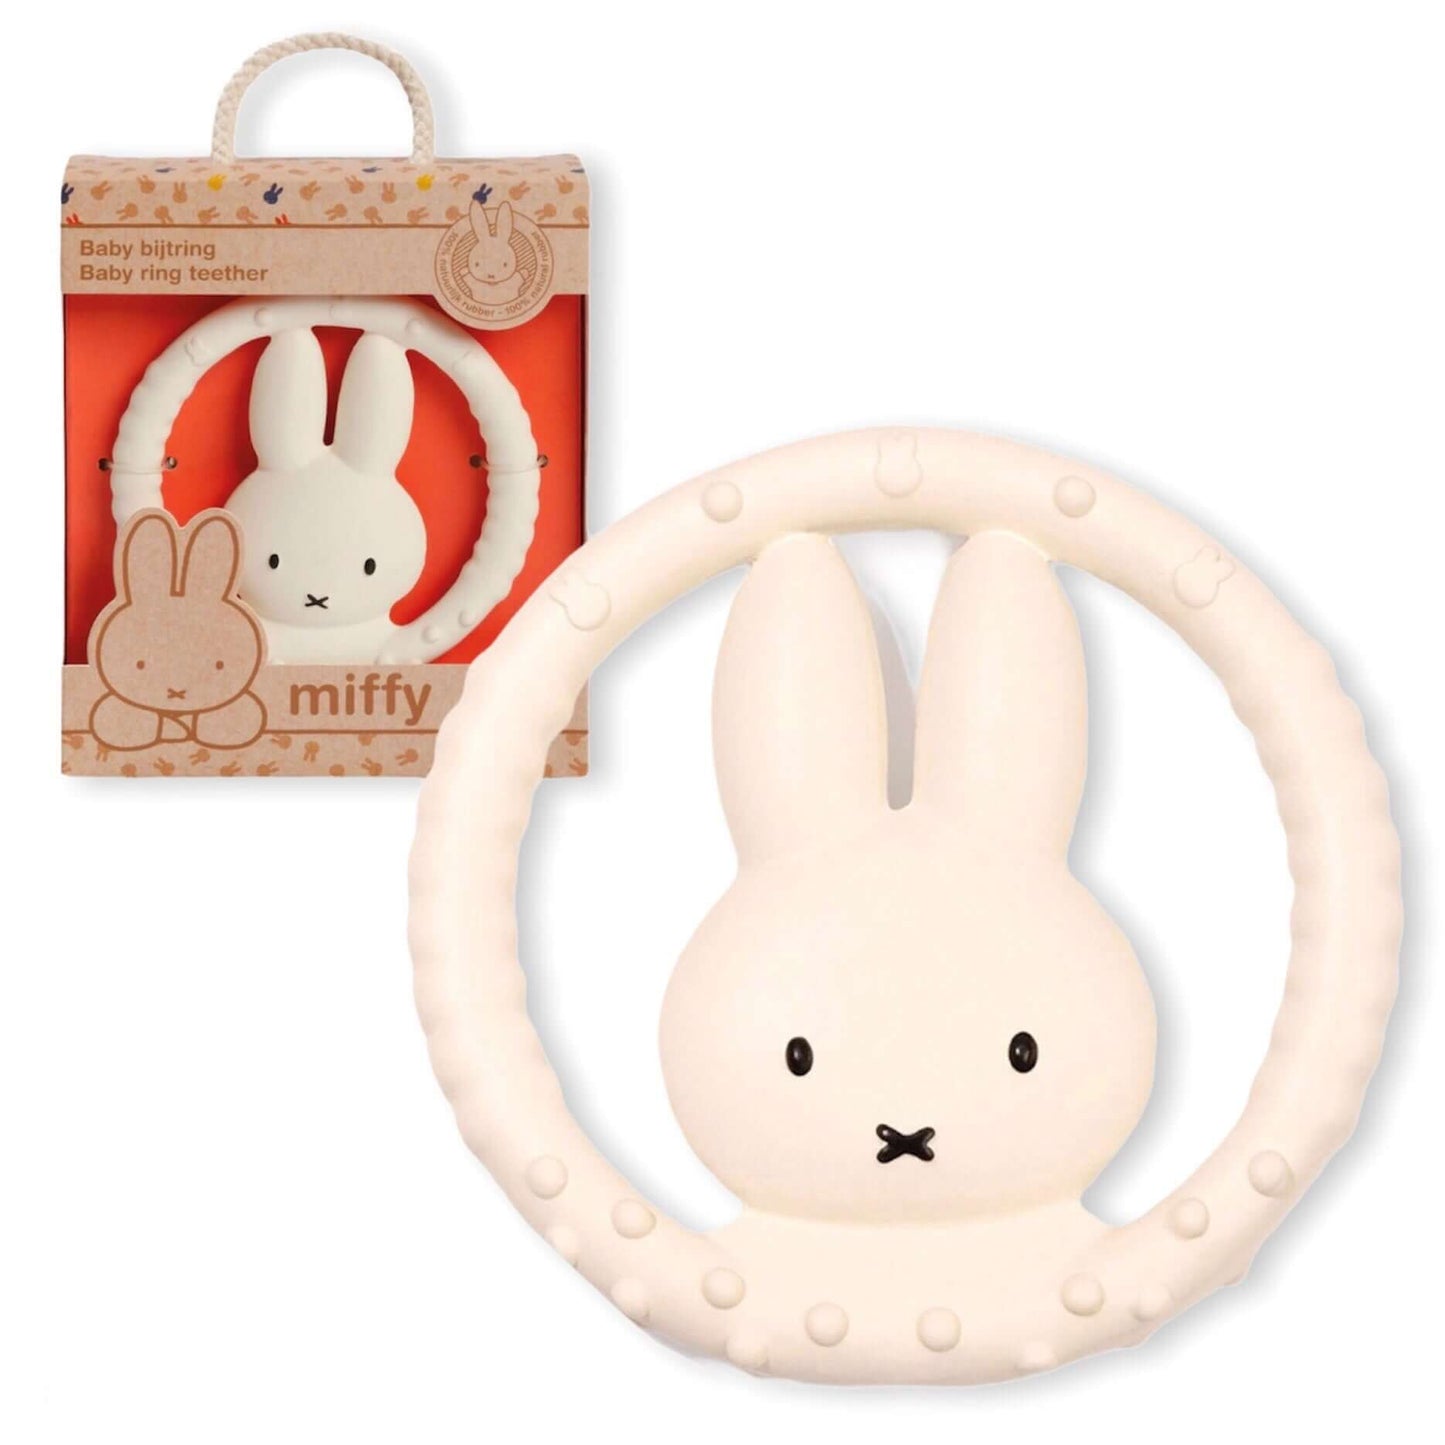 Miffy Rubber Teething Ring